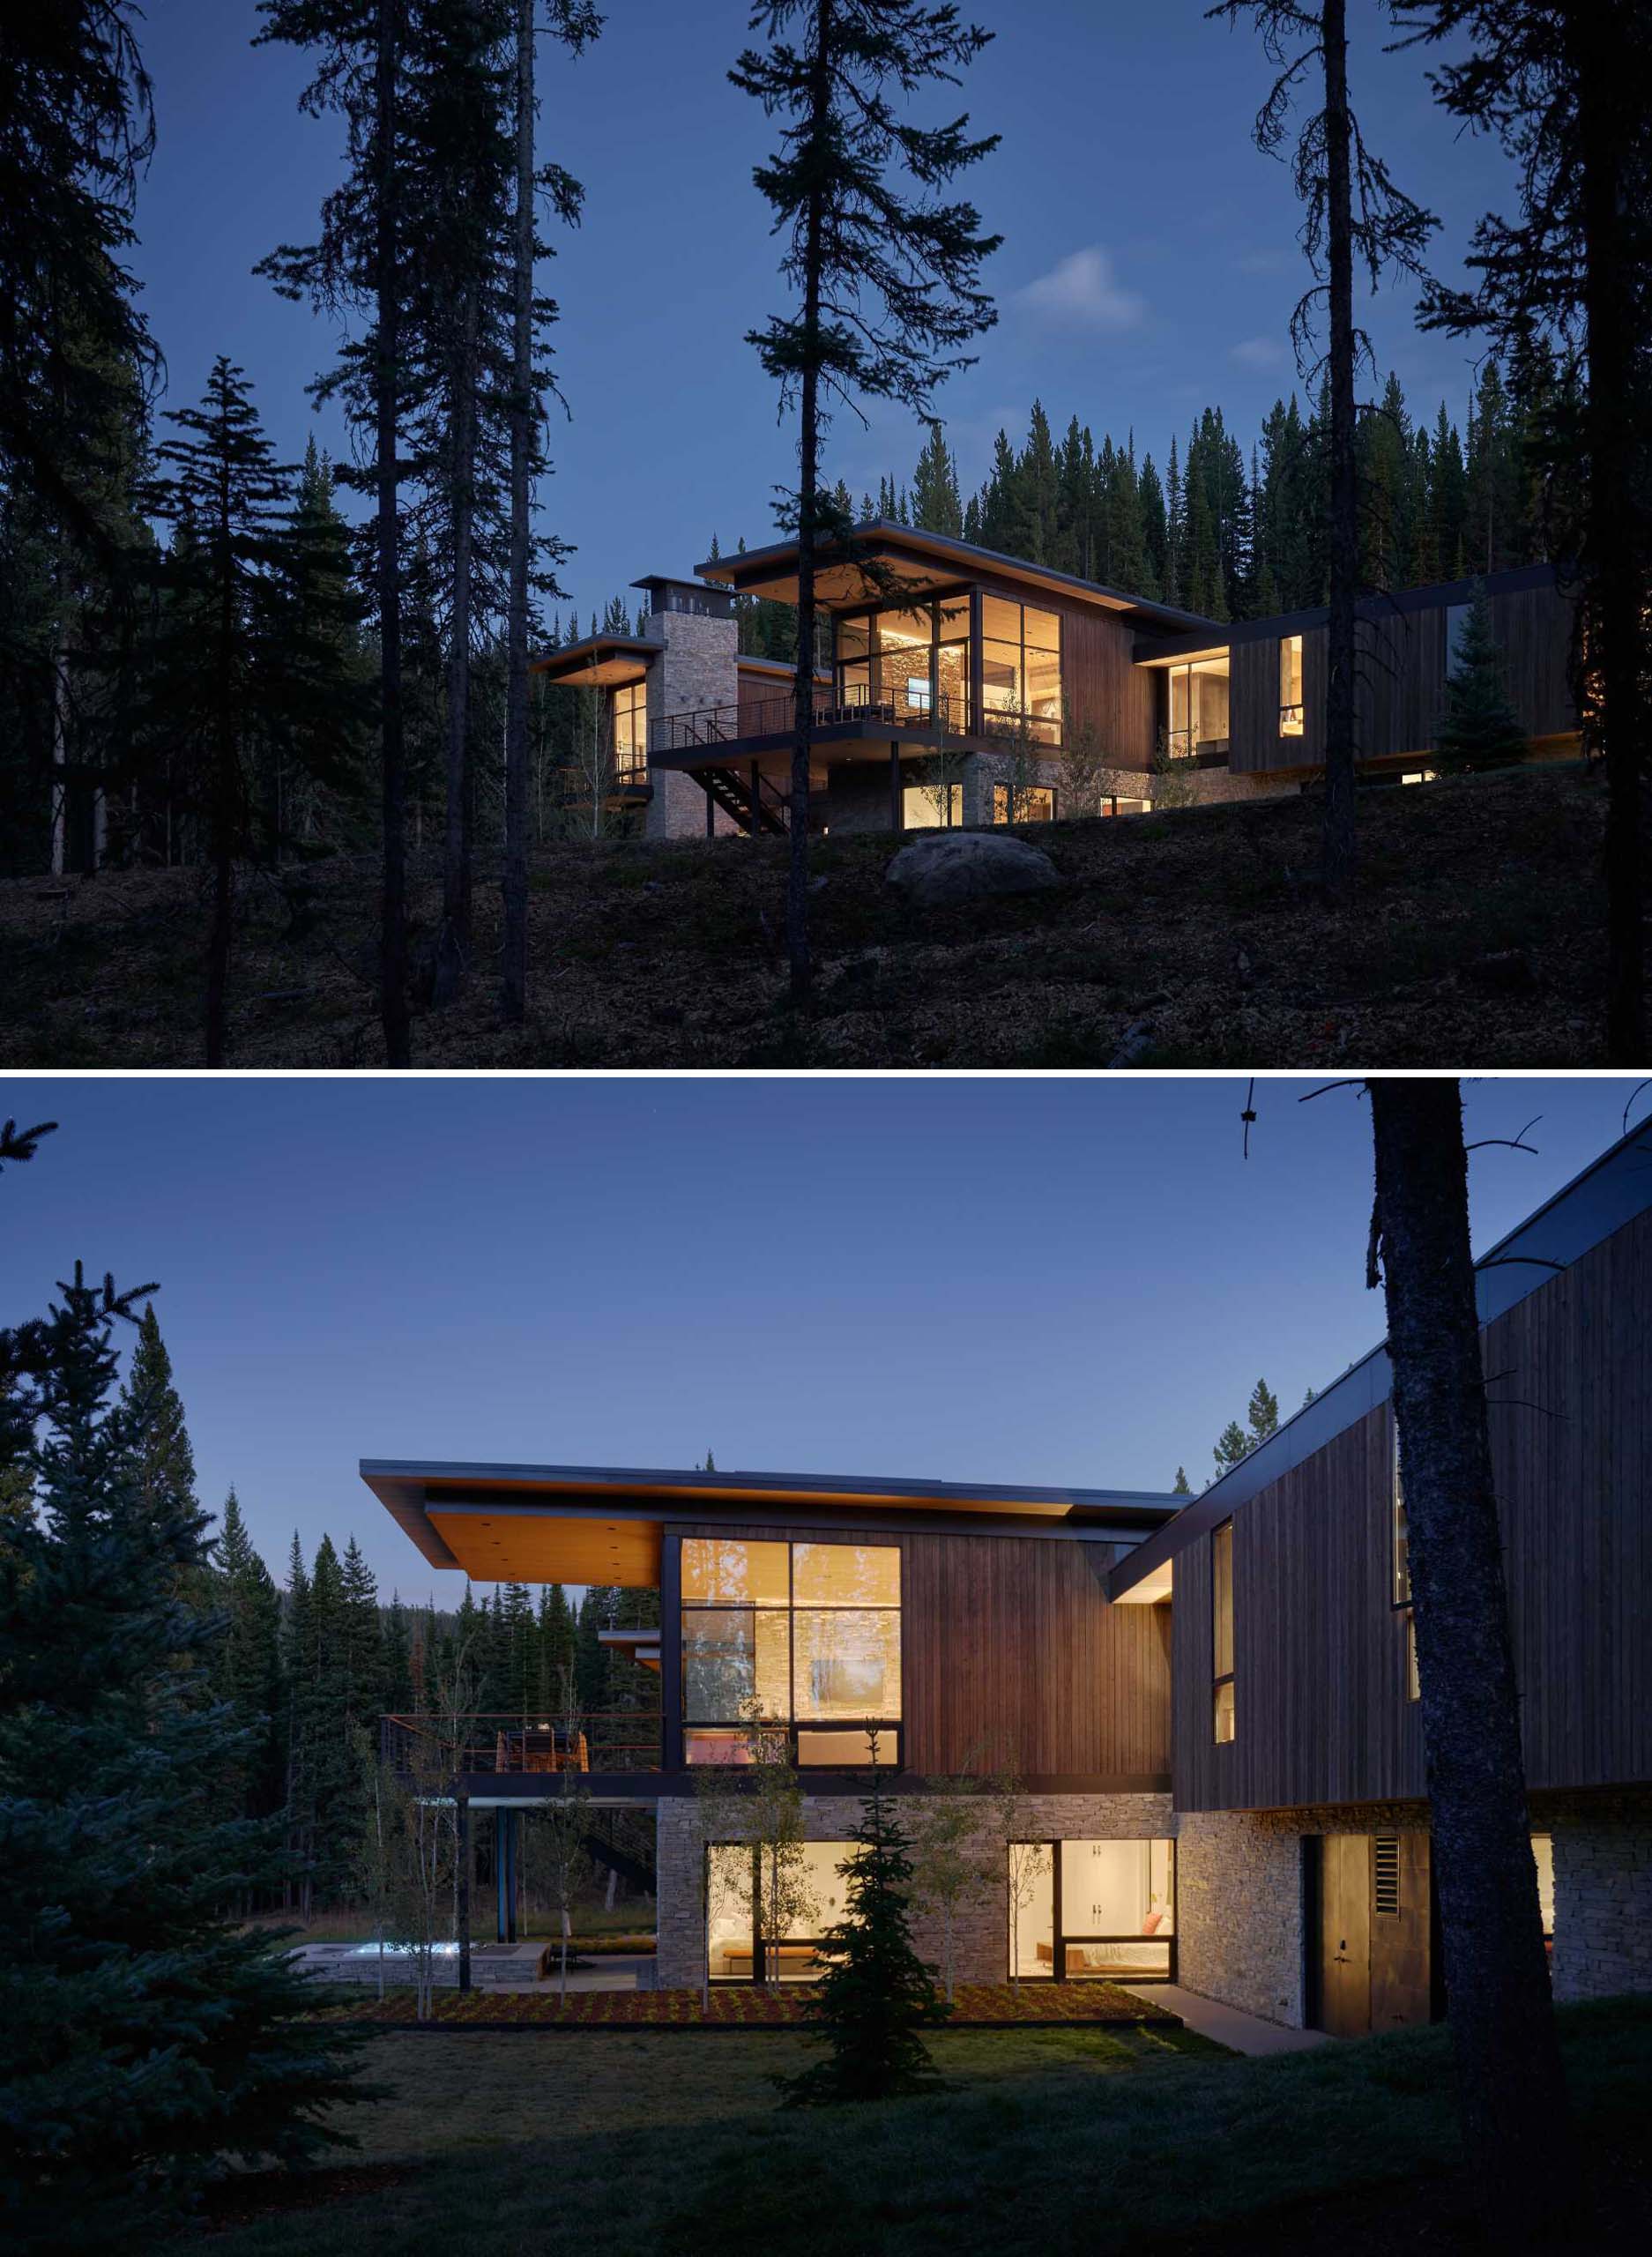 CLB Architects has sent us photos of a mountain retreat they designed in a densely forested area of Big Sky, Montana.